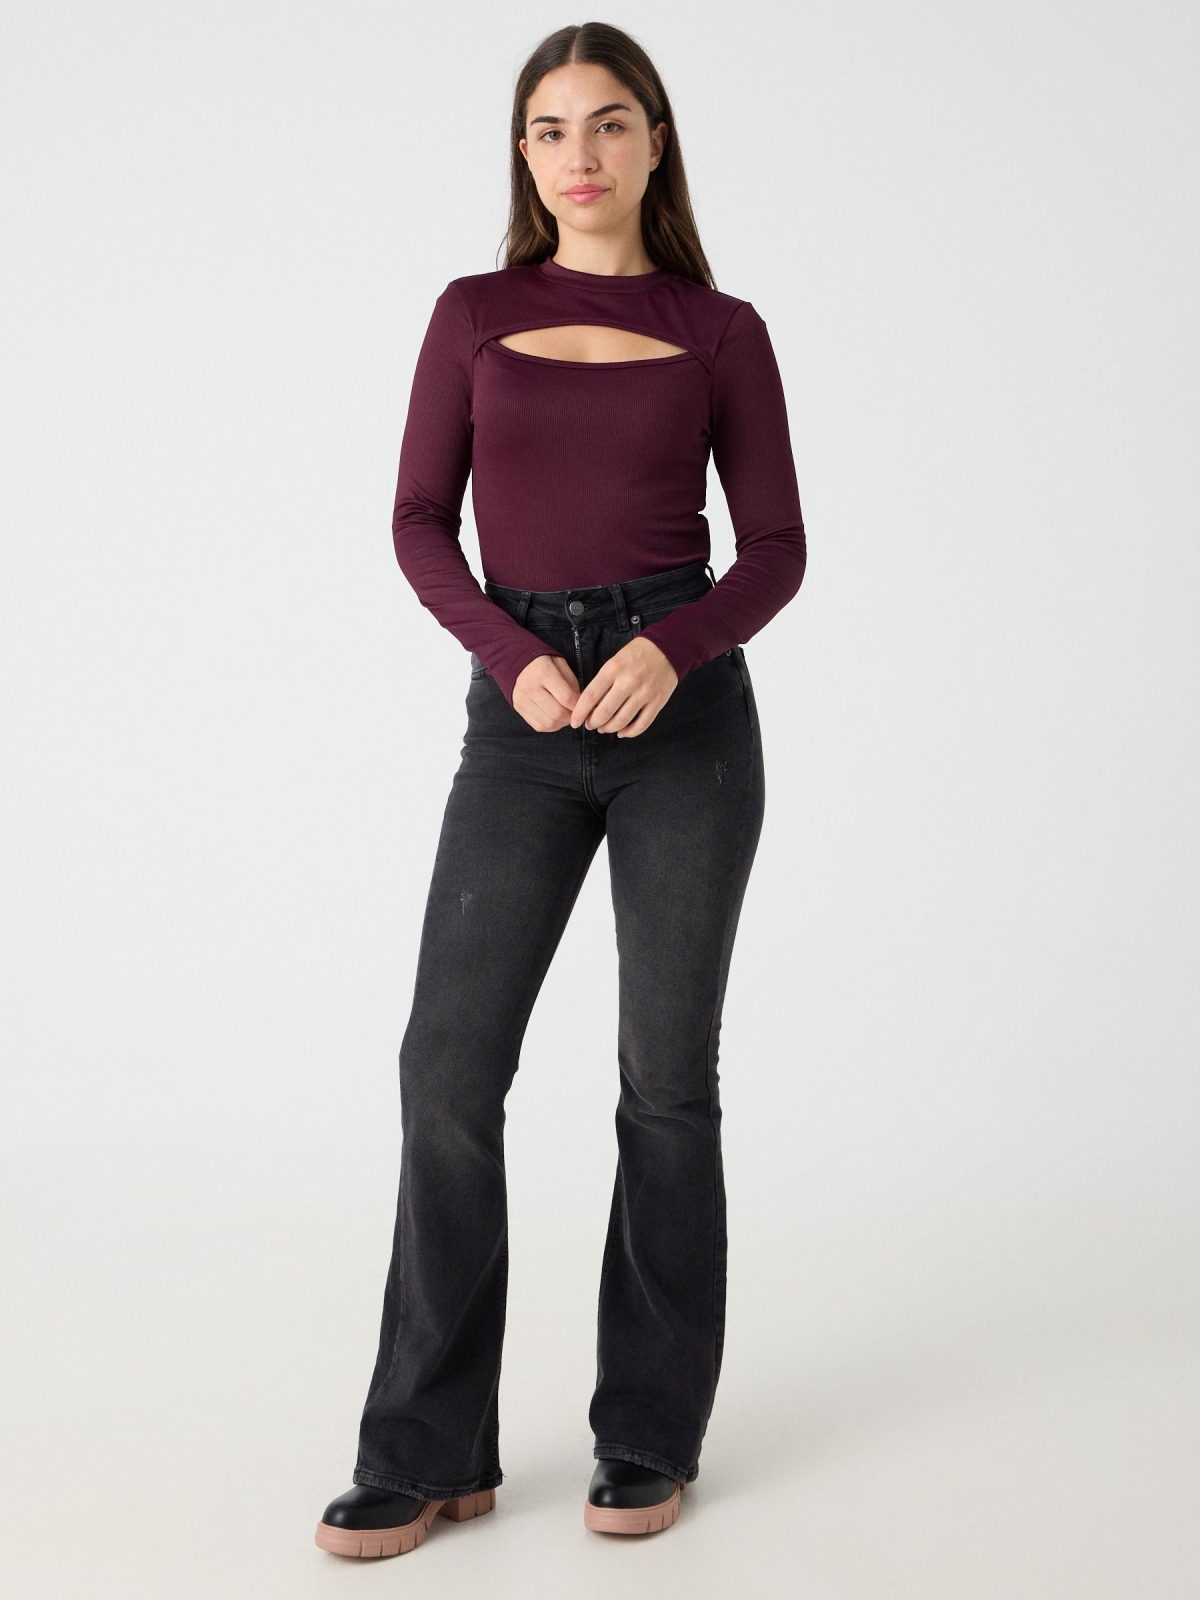 Long-sleeve cut-out ribbed t-shirt aubergine front view